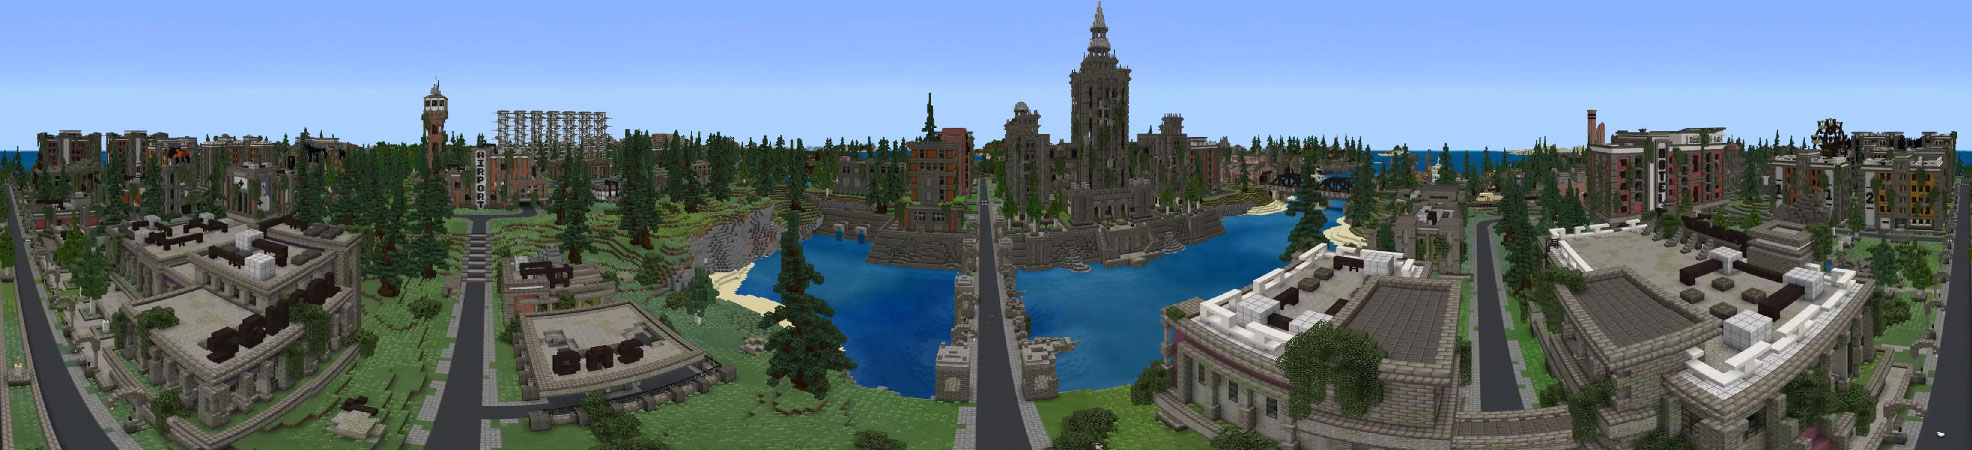 Ghost City Roleplay In Minecraft Marketplace Minecraft